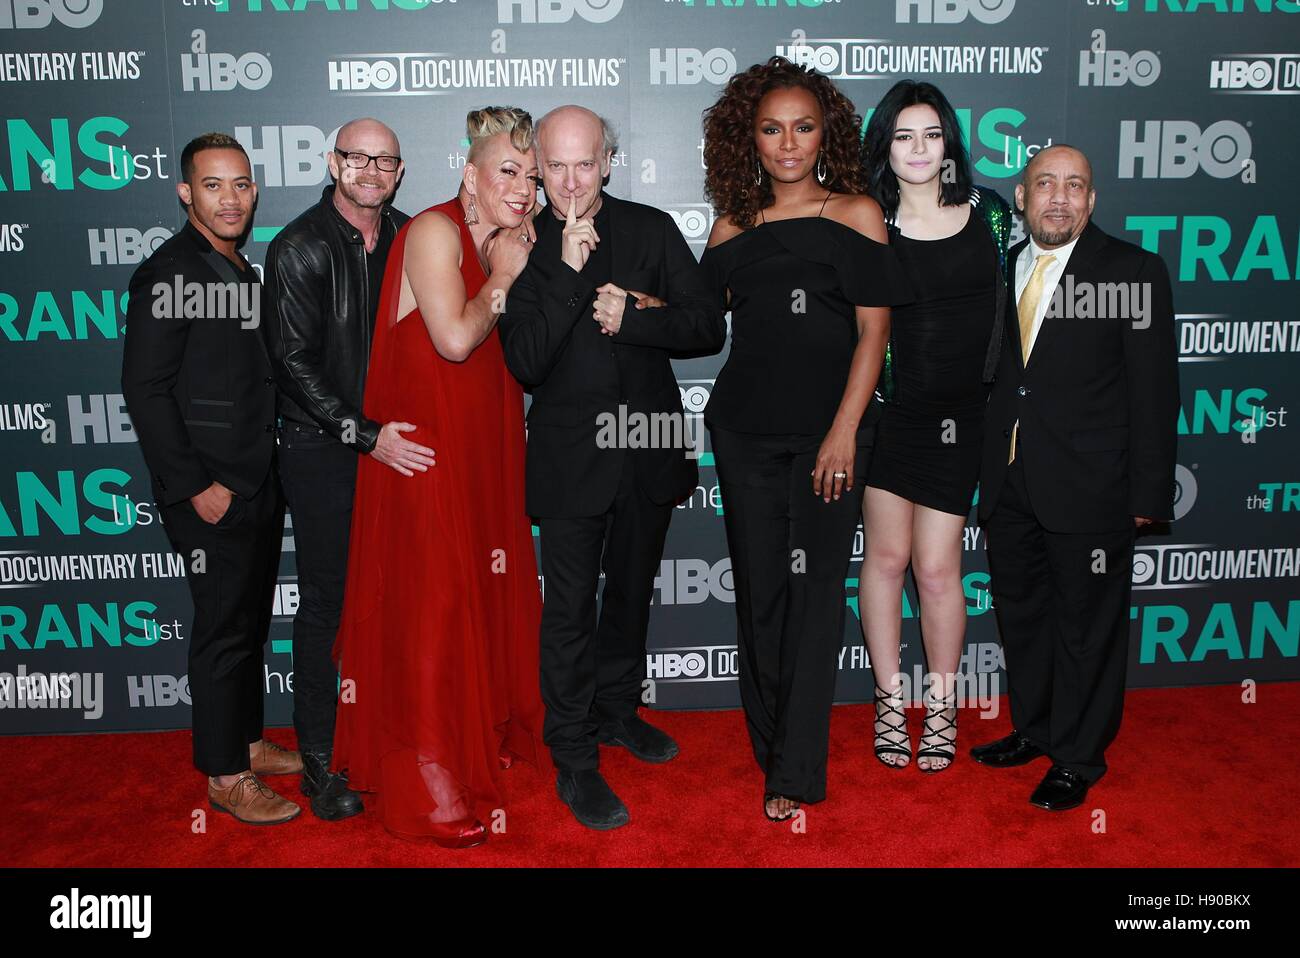 New York, NY, USA. 17th Nov, 2016. Shane Ortega, Buck Angel, Bamby Salcedo, Timothy Greenfield Sanders, Janet Mock Nicole Maines and Kylar Broadus at HBO Documentary Films New York Premiere of 'THE TRANS LIST' at The Paley Center for Media on November 17, Stock Photo